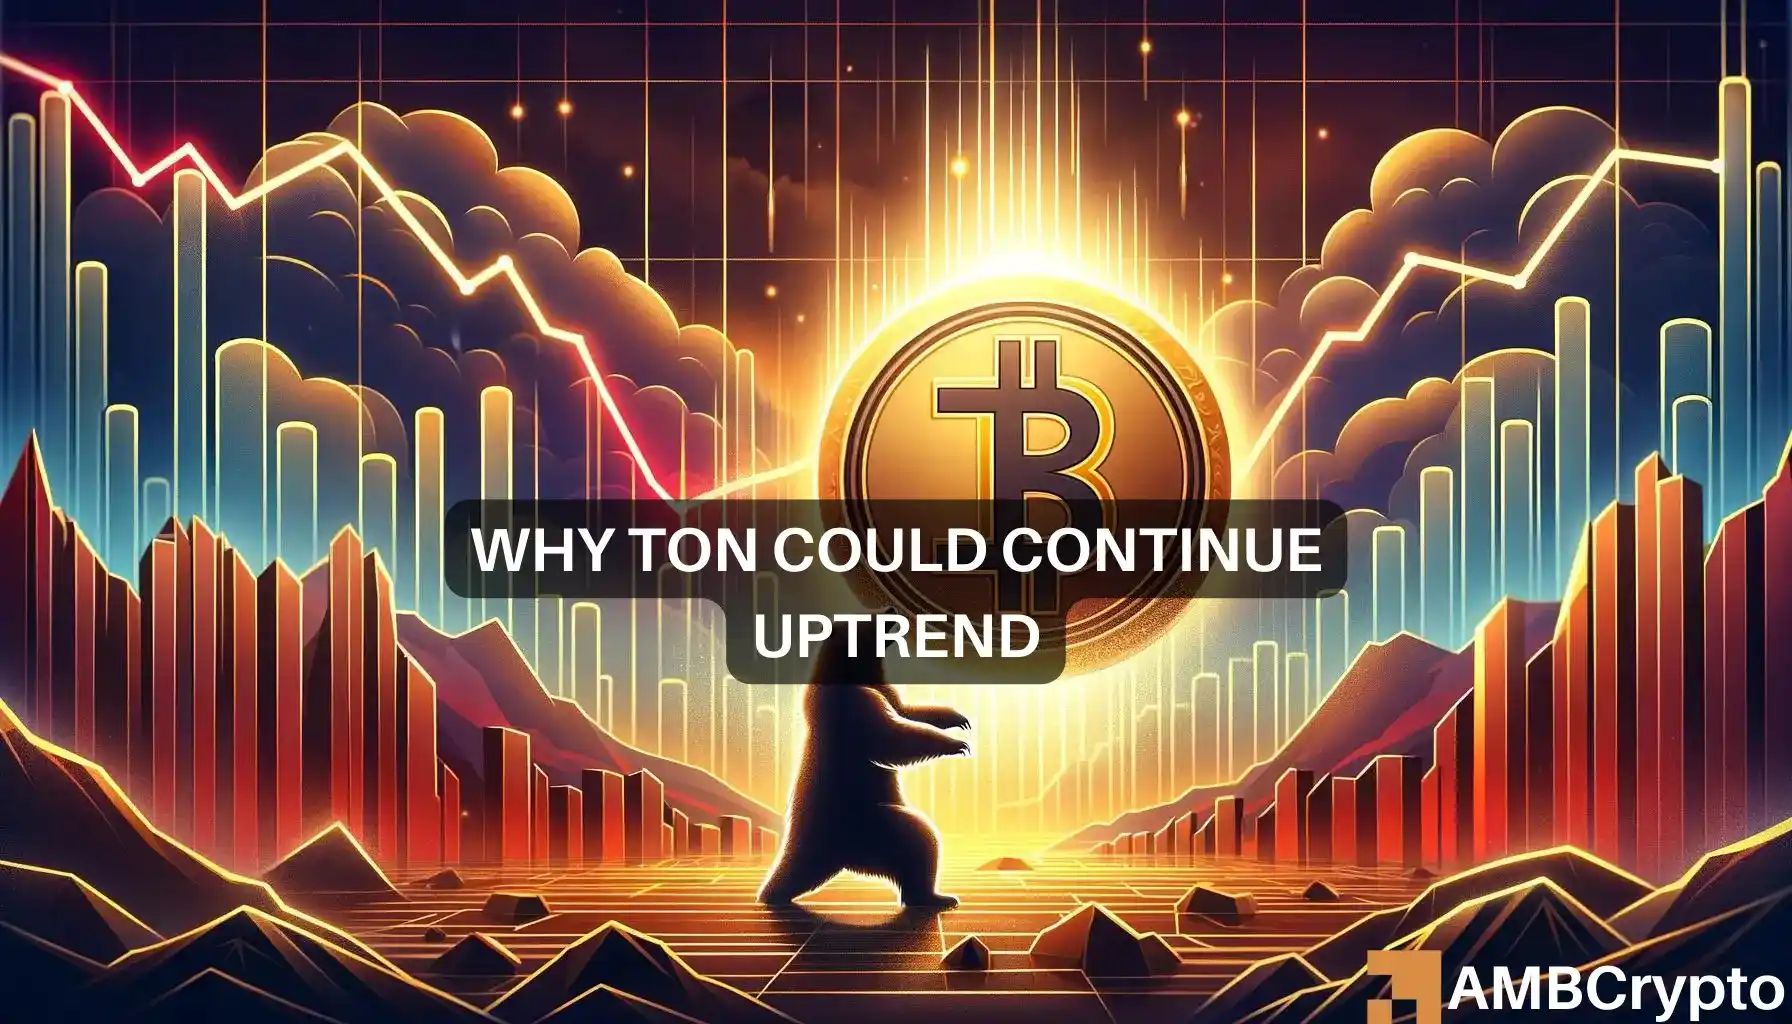 Toncoin [TON] to outperform Bitcoin? Investors wait with bated breath